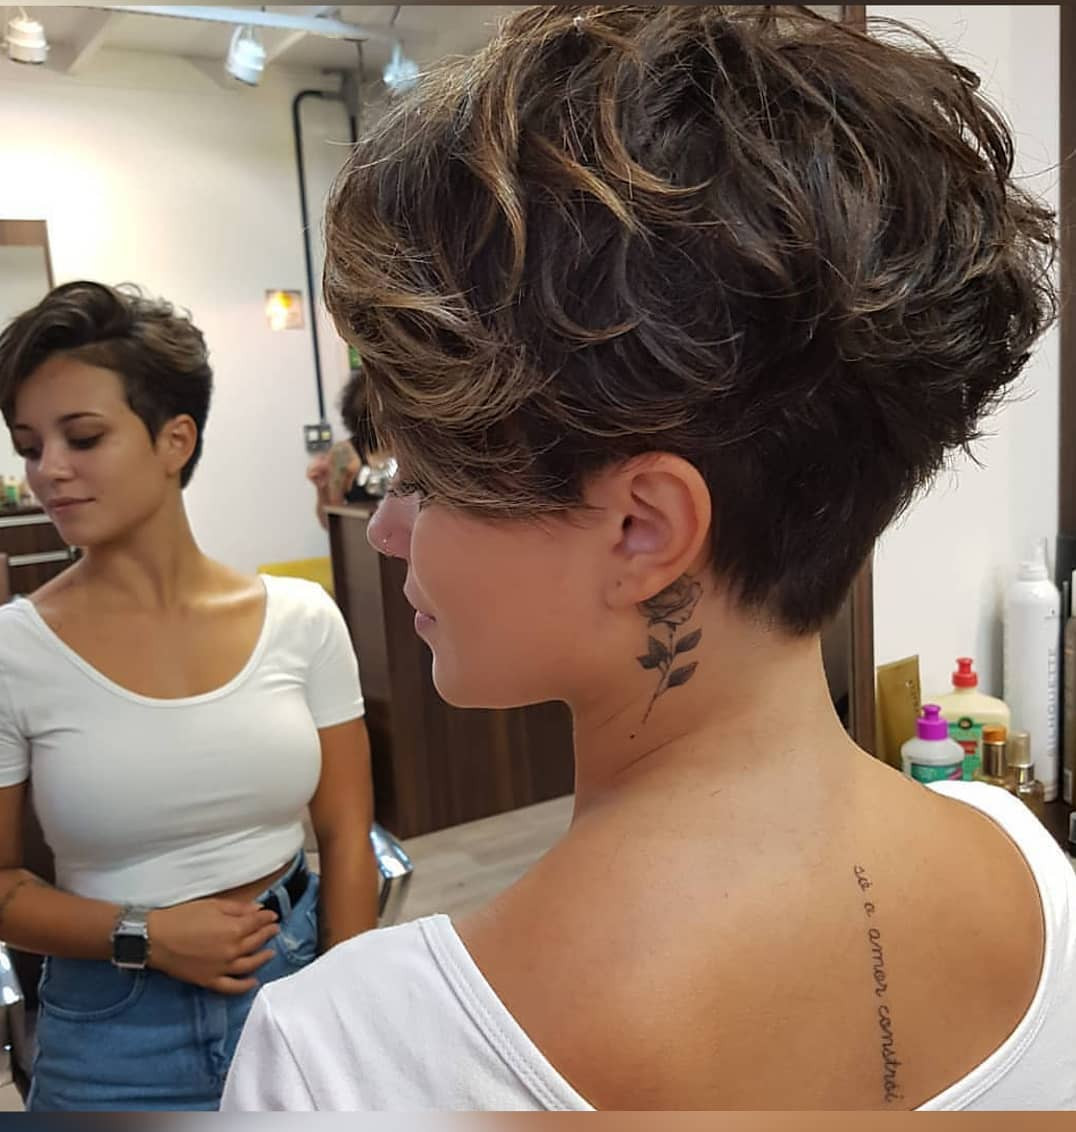 Hairstyles For Curly Hair 2020
 25 Glamorous Pixie Cut 2020 for Astonishing Look